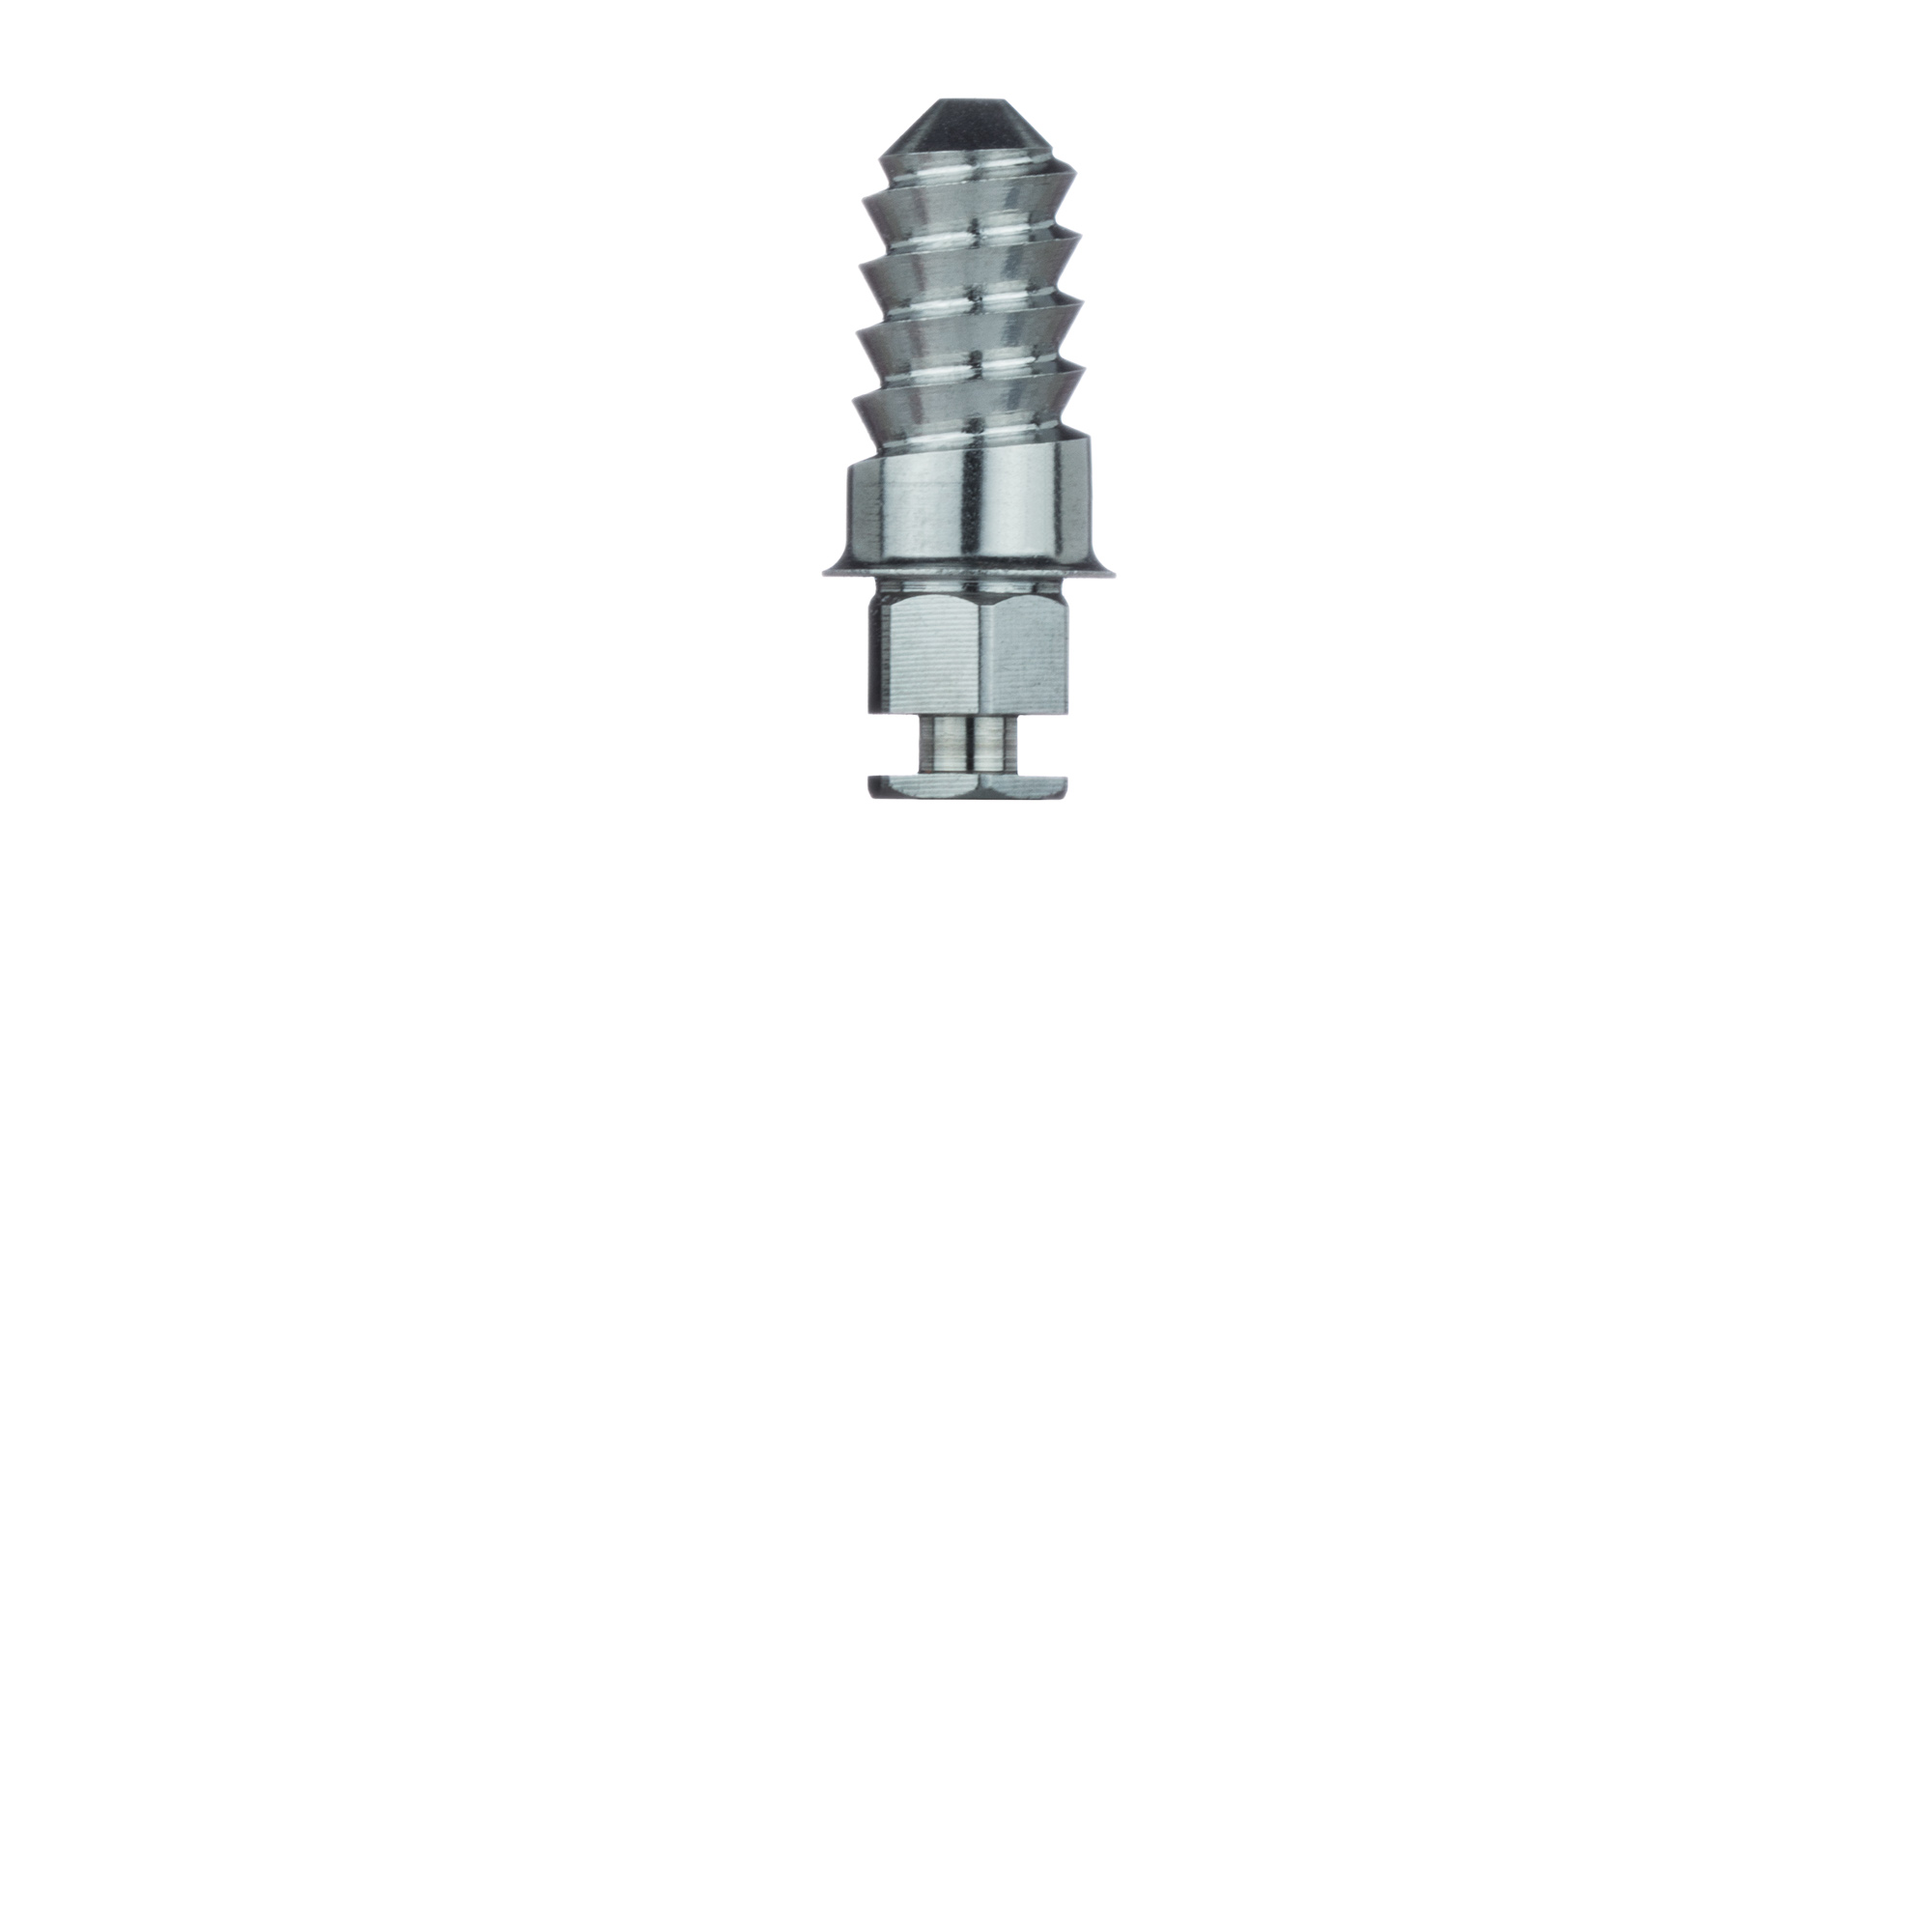 G4005 Surgery, Expansion Spreader, 4.5mm X 7mm